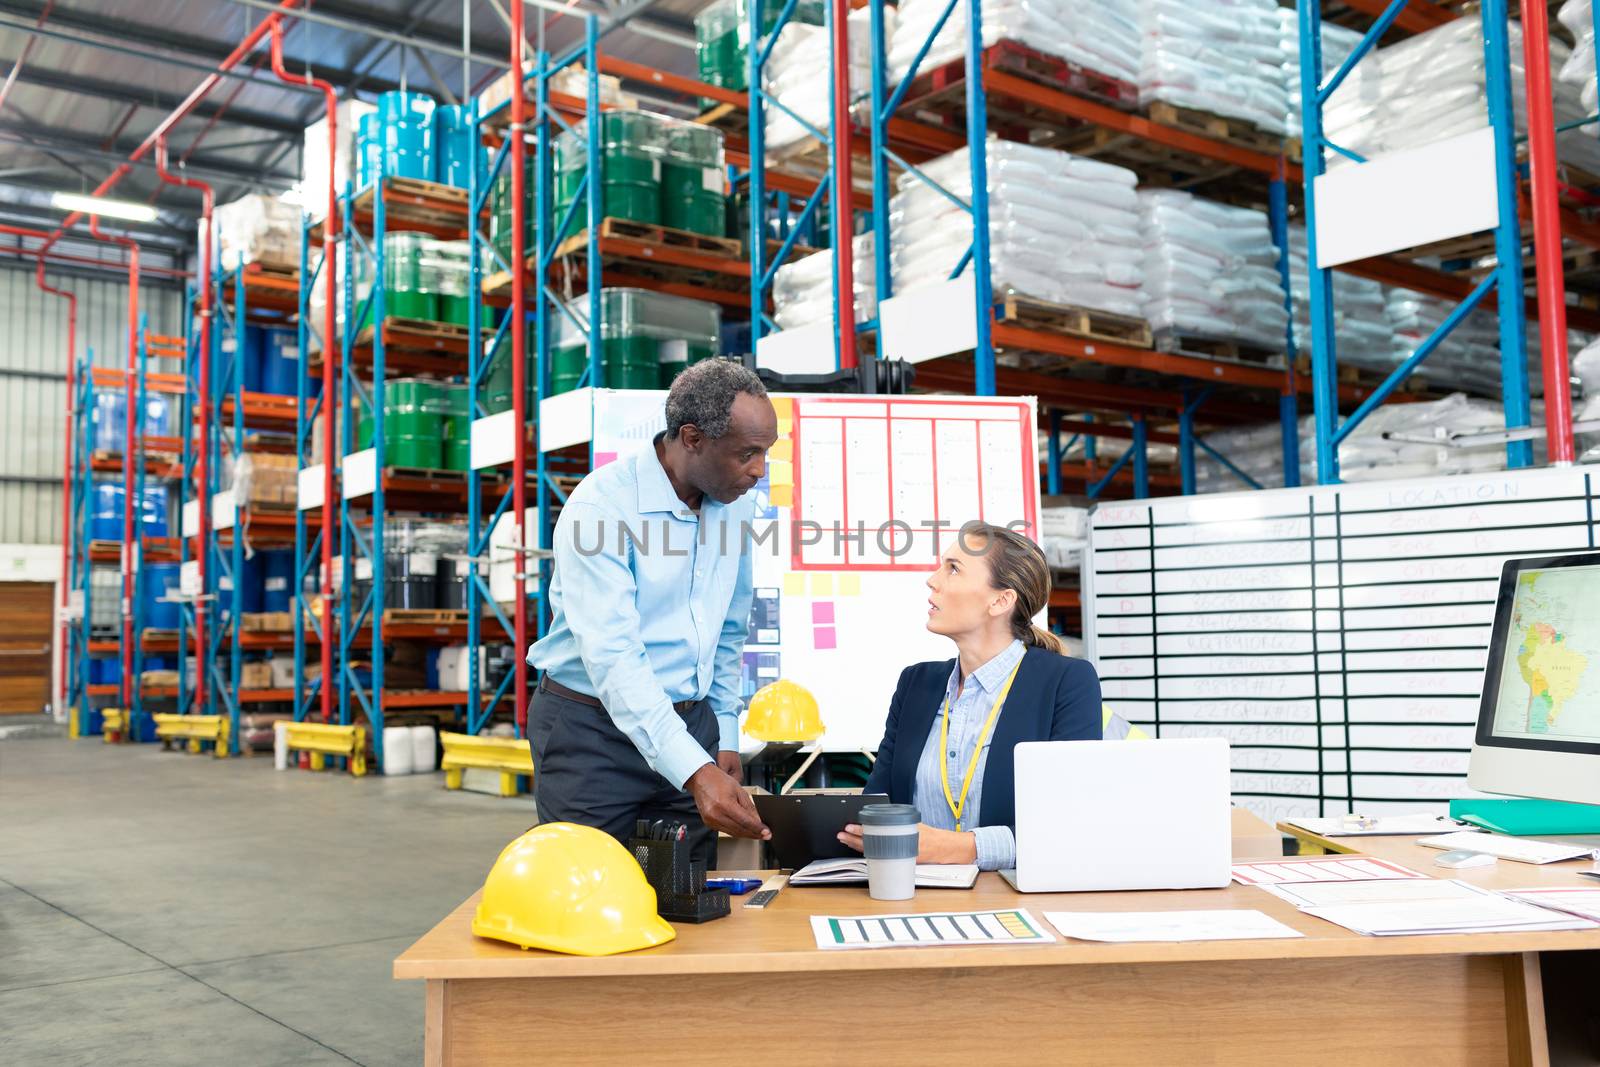 Front view of beautiful young Caucasian female manager with African-american coworker discussing over clipboard at desk in warehouse. This is a freight transportation and distribution warehouse. Industrial and industrial workers concept